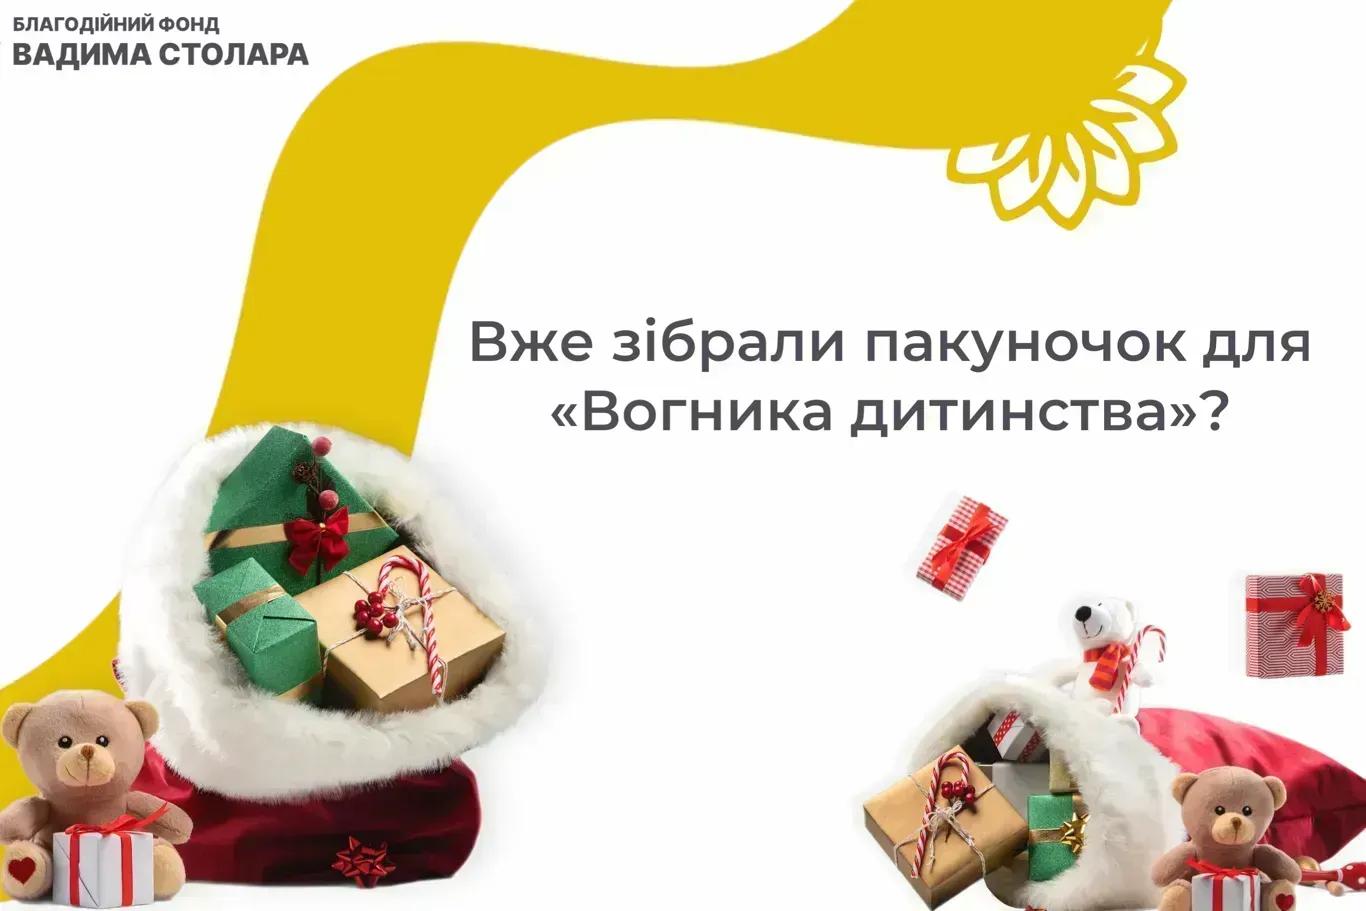 The Vadym Stolar Foundation calls on philanthropists to collect gifts for IDP children for St. Nicholas Day